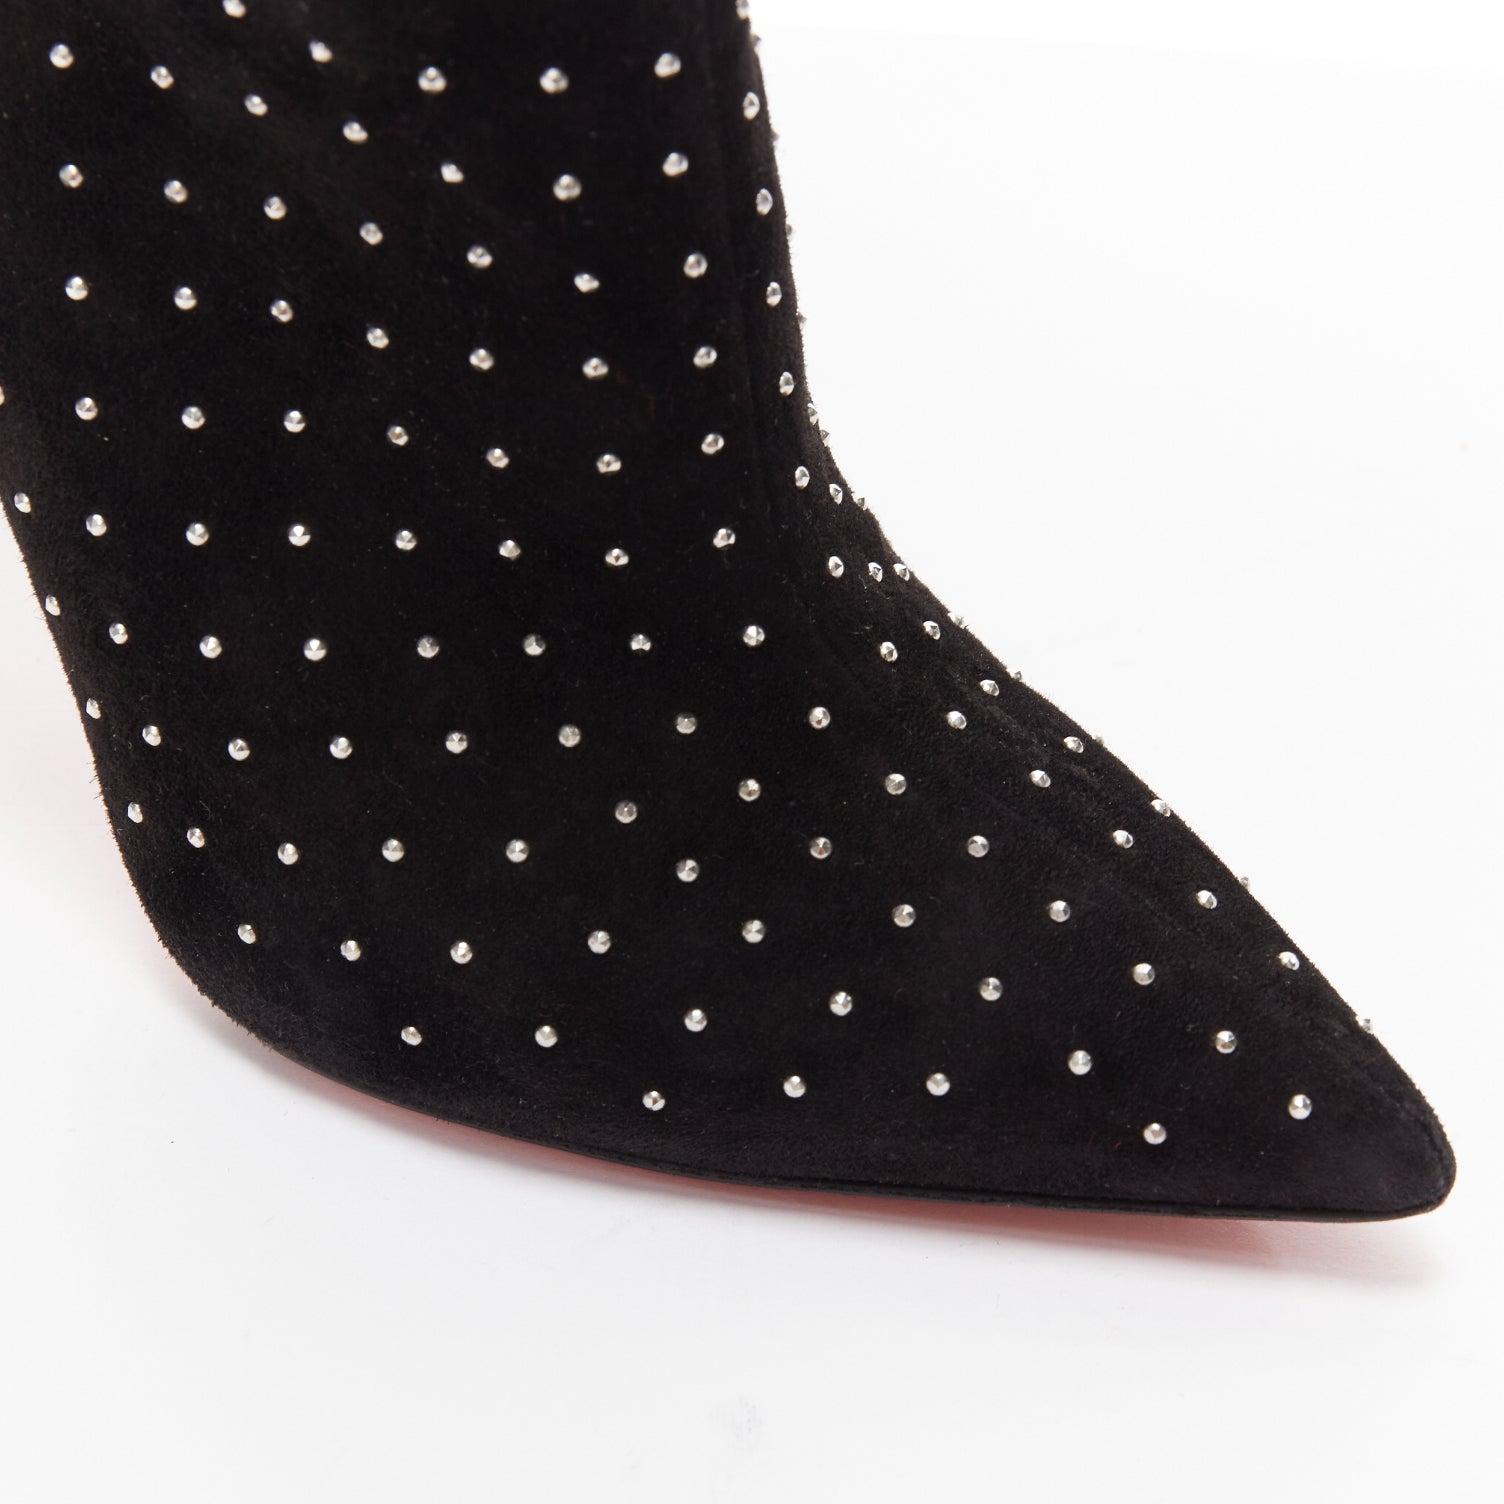 CHRISTIAN LOUBOUTIN So Kate Booty black suede micro stud embellished pointy EU36 For Sale 3